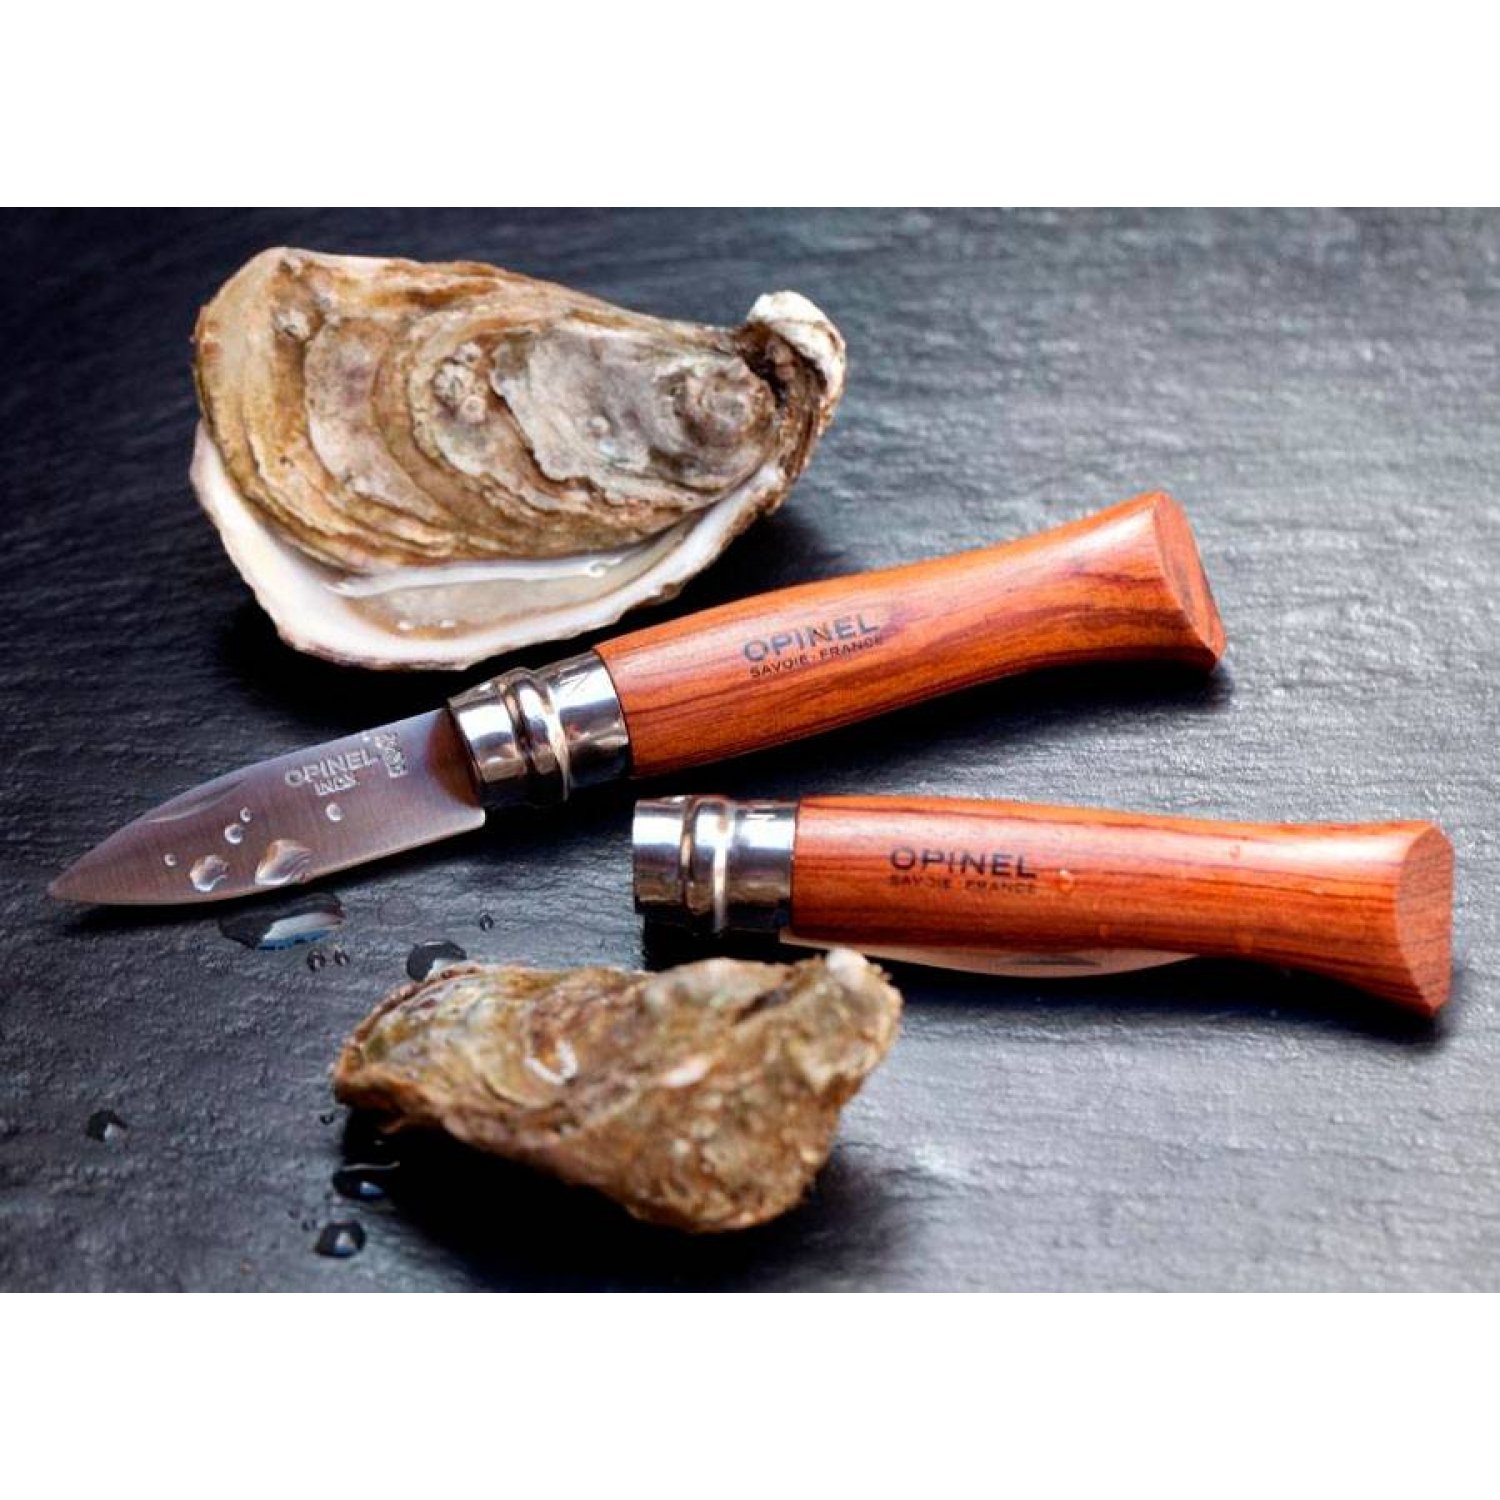 Opinel Oyster Knife No. 9 - The best knife for opening an oyster